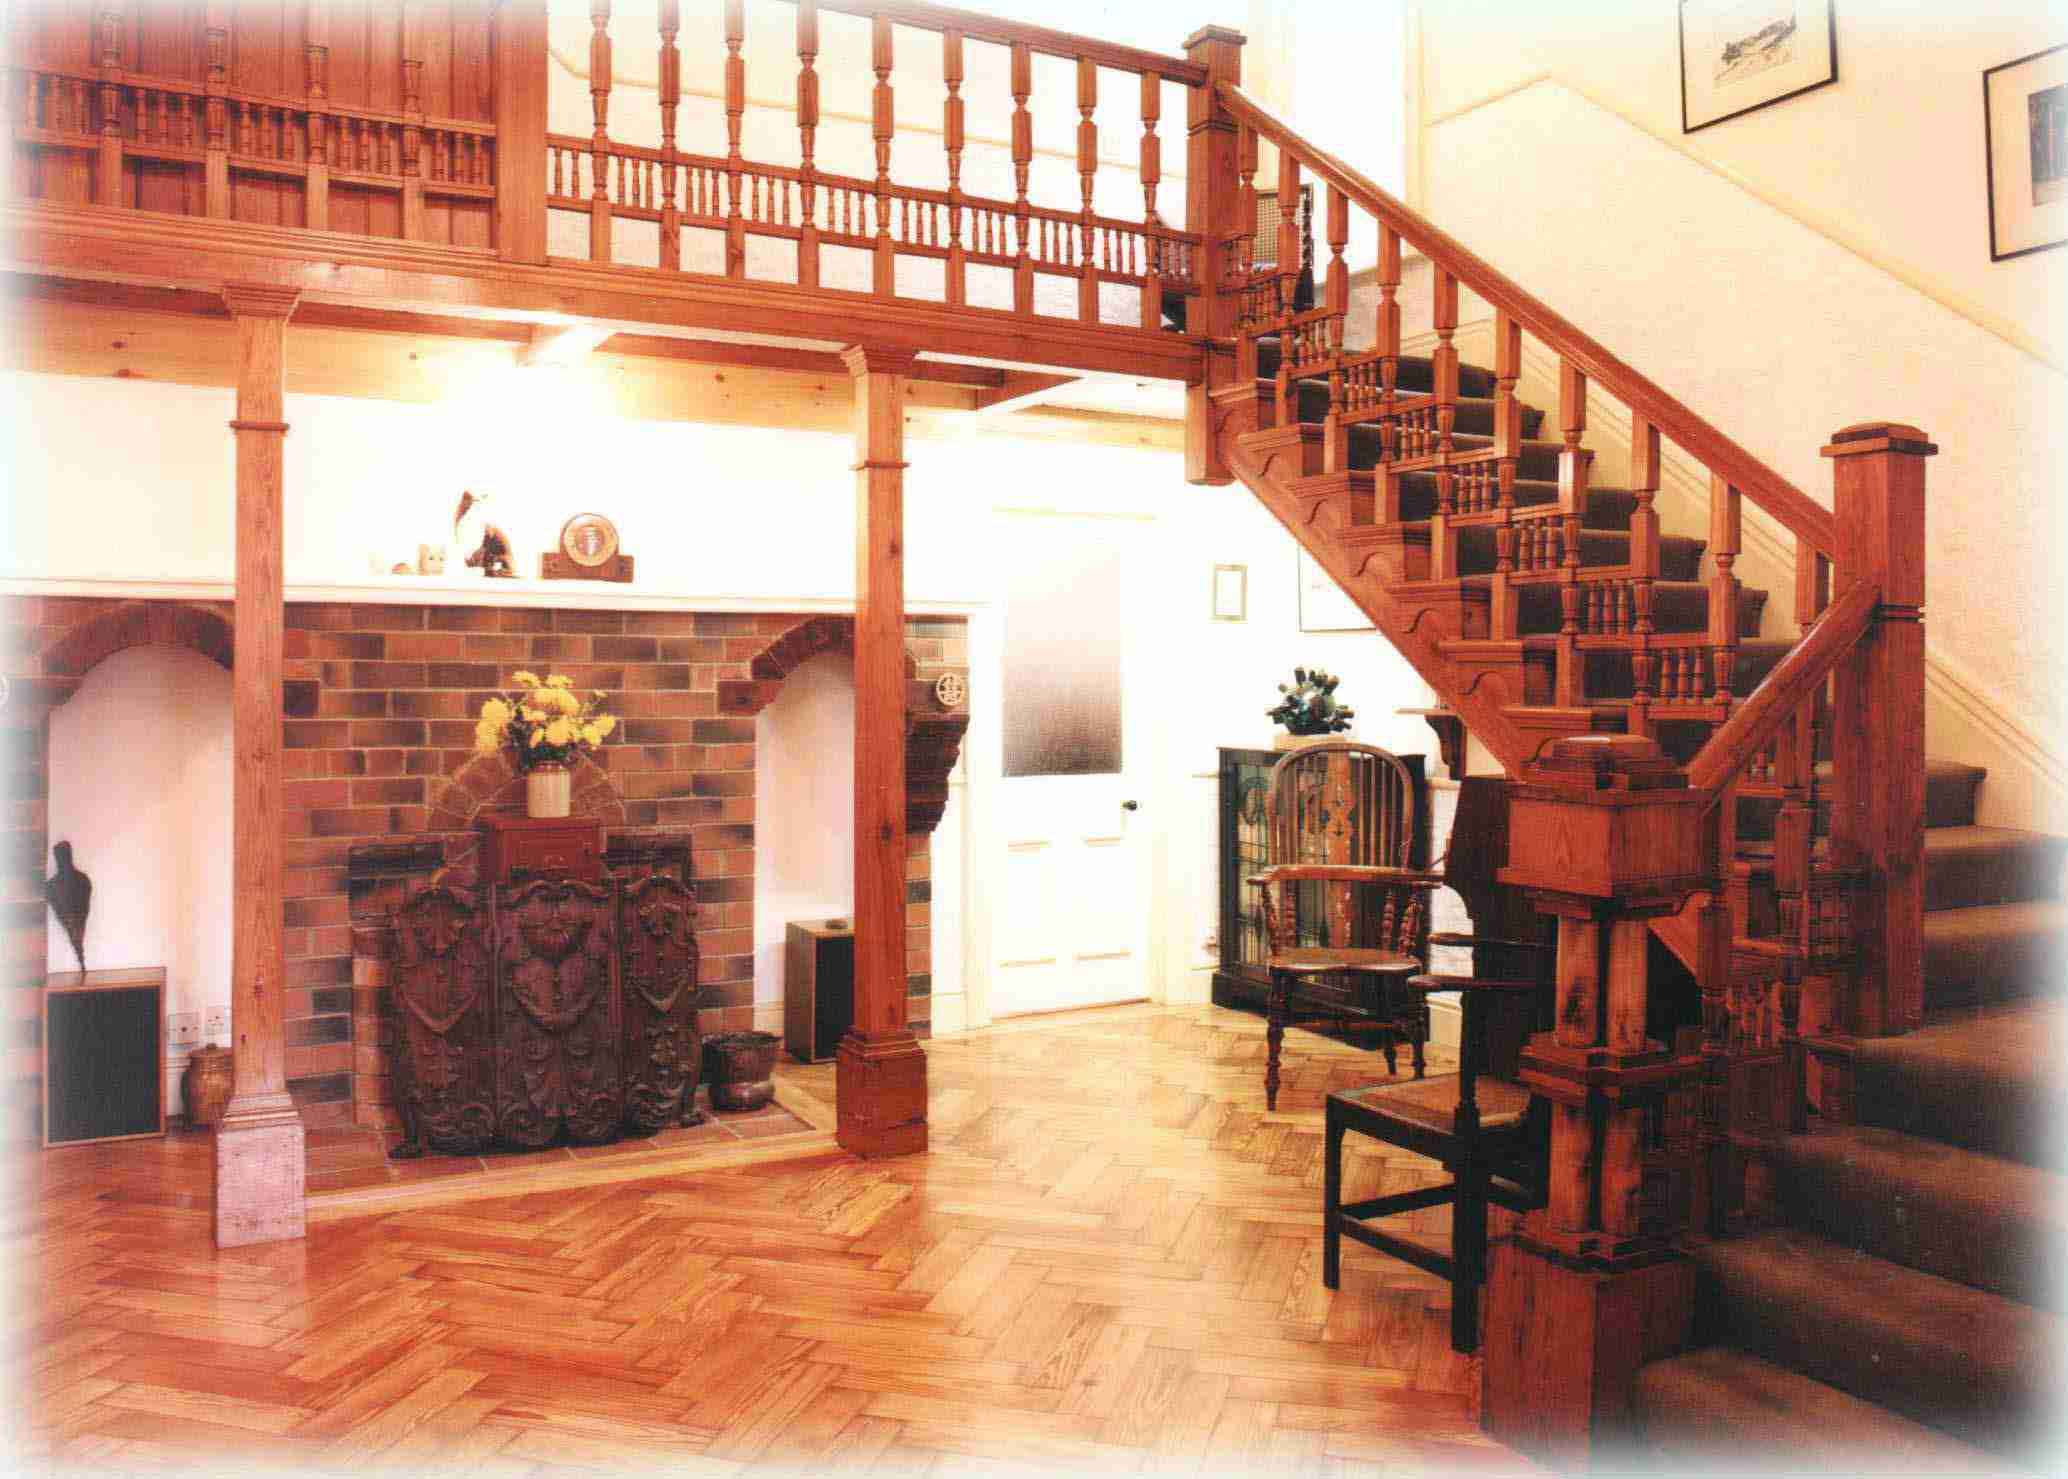 Hallway and staircase